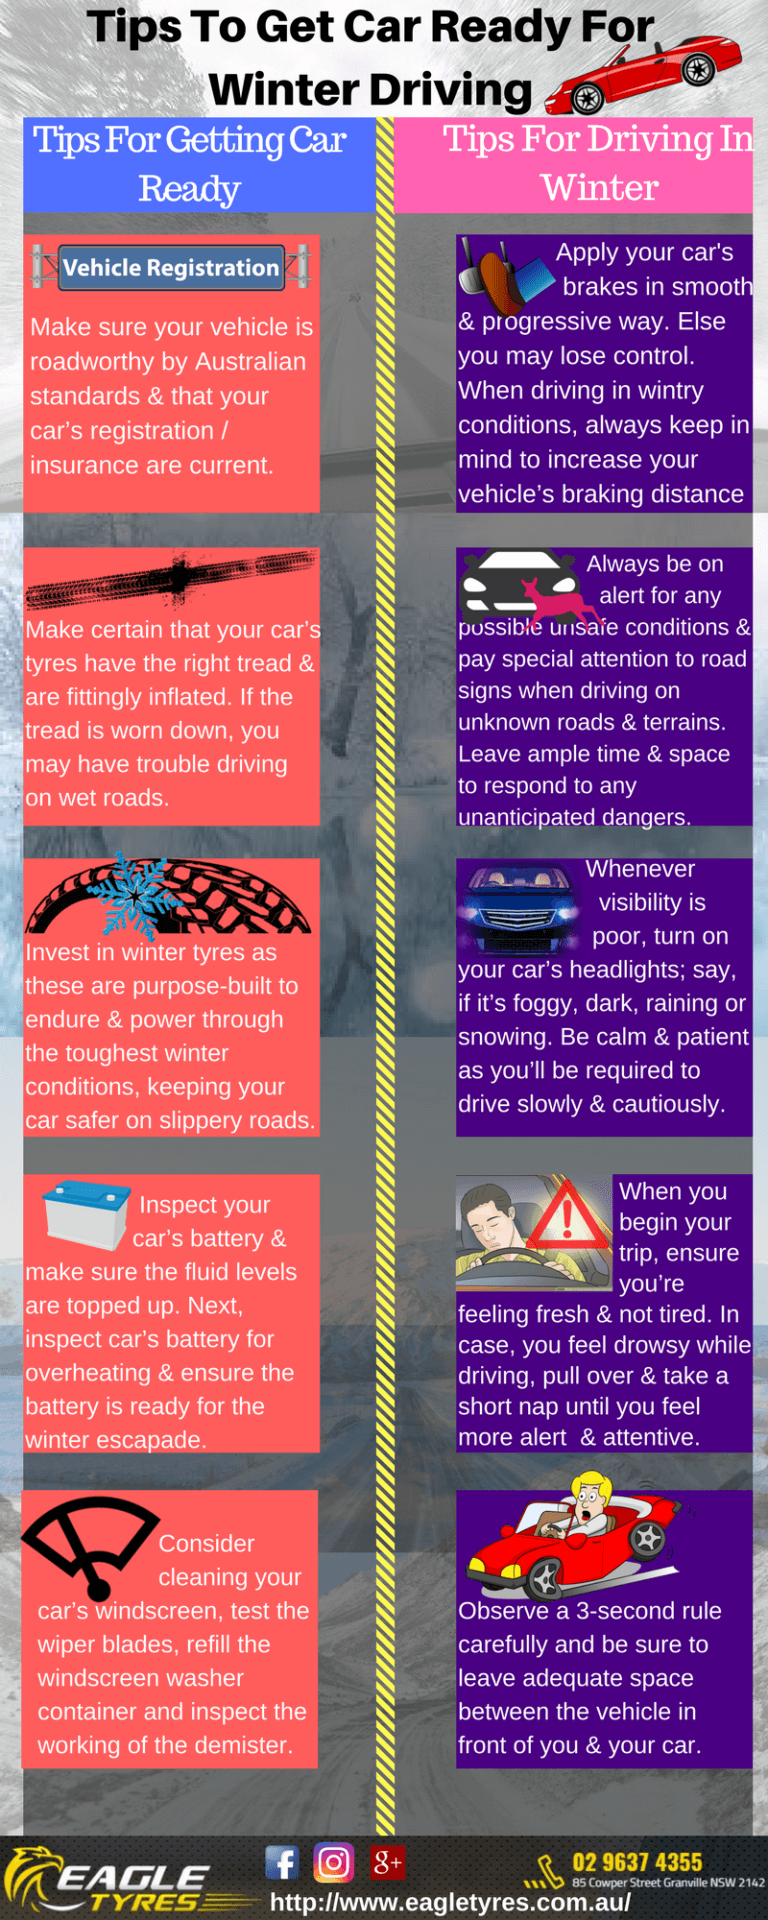 Tips-To-Get-Car-Ready-For-Winter-Driving